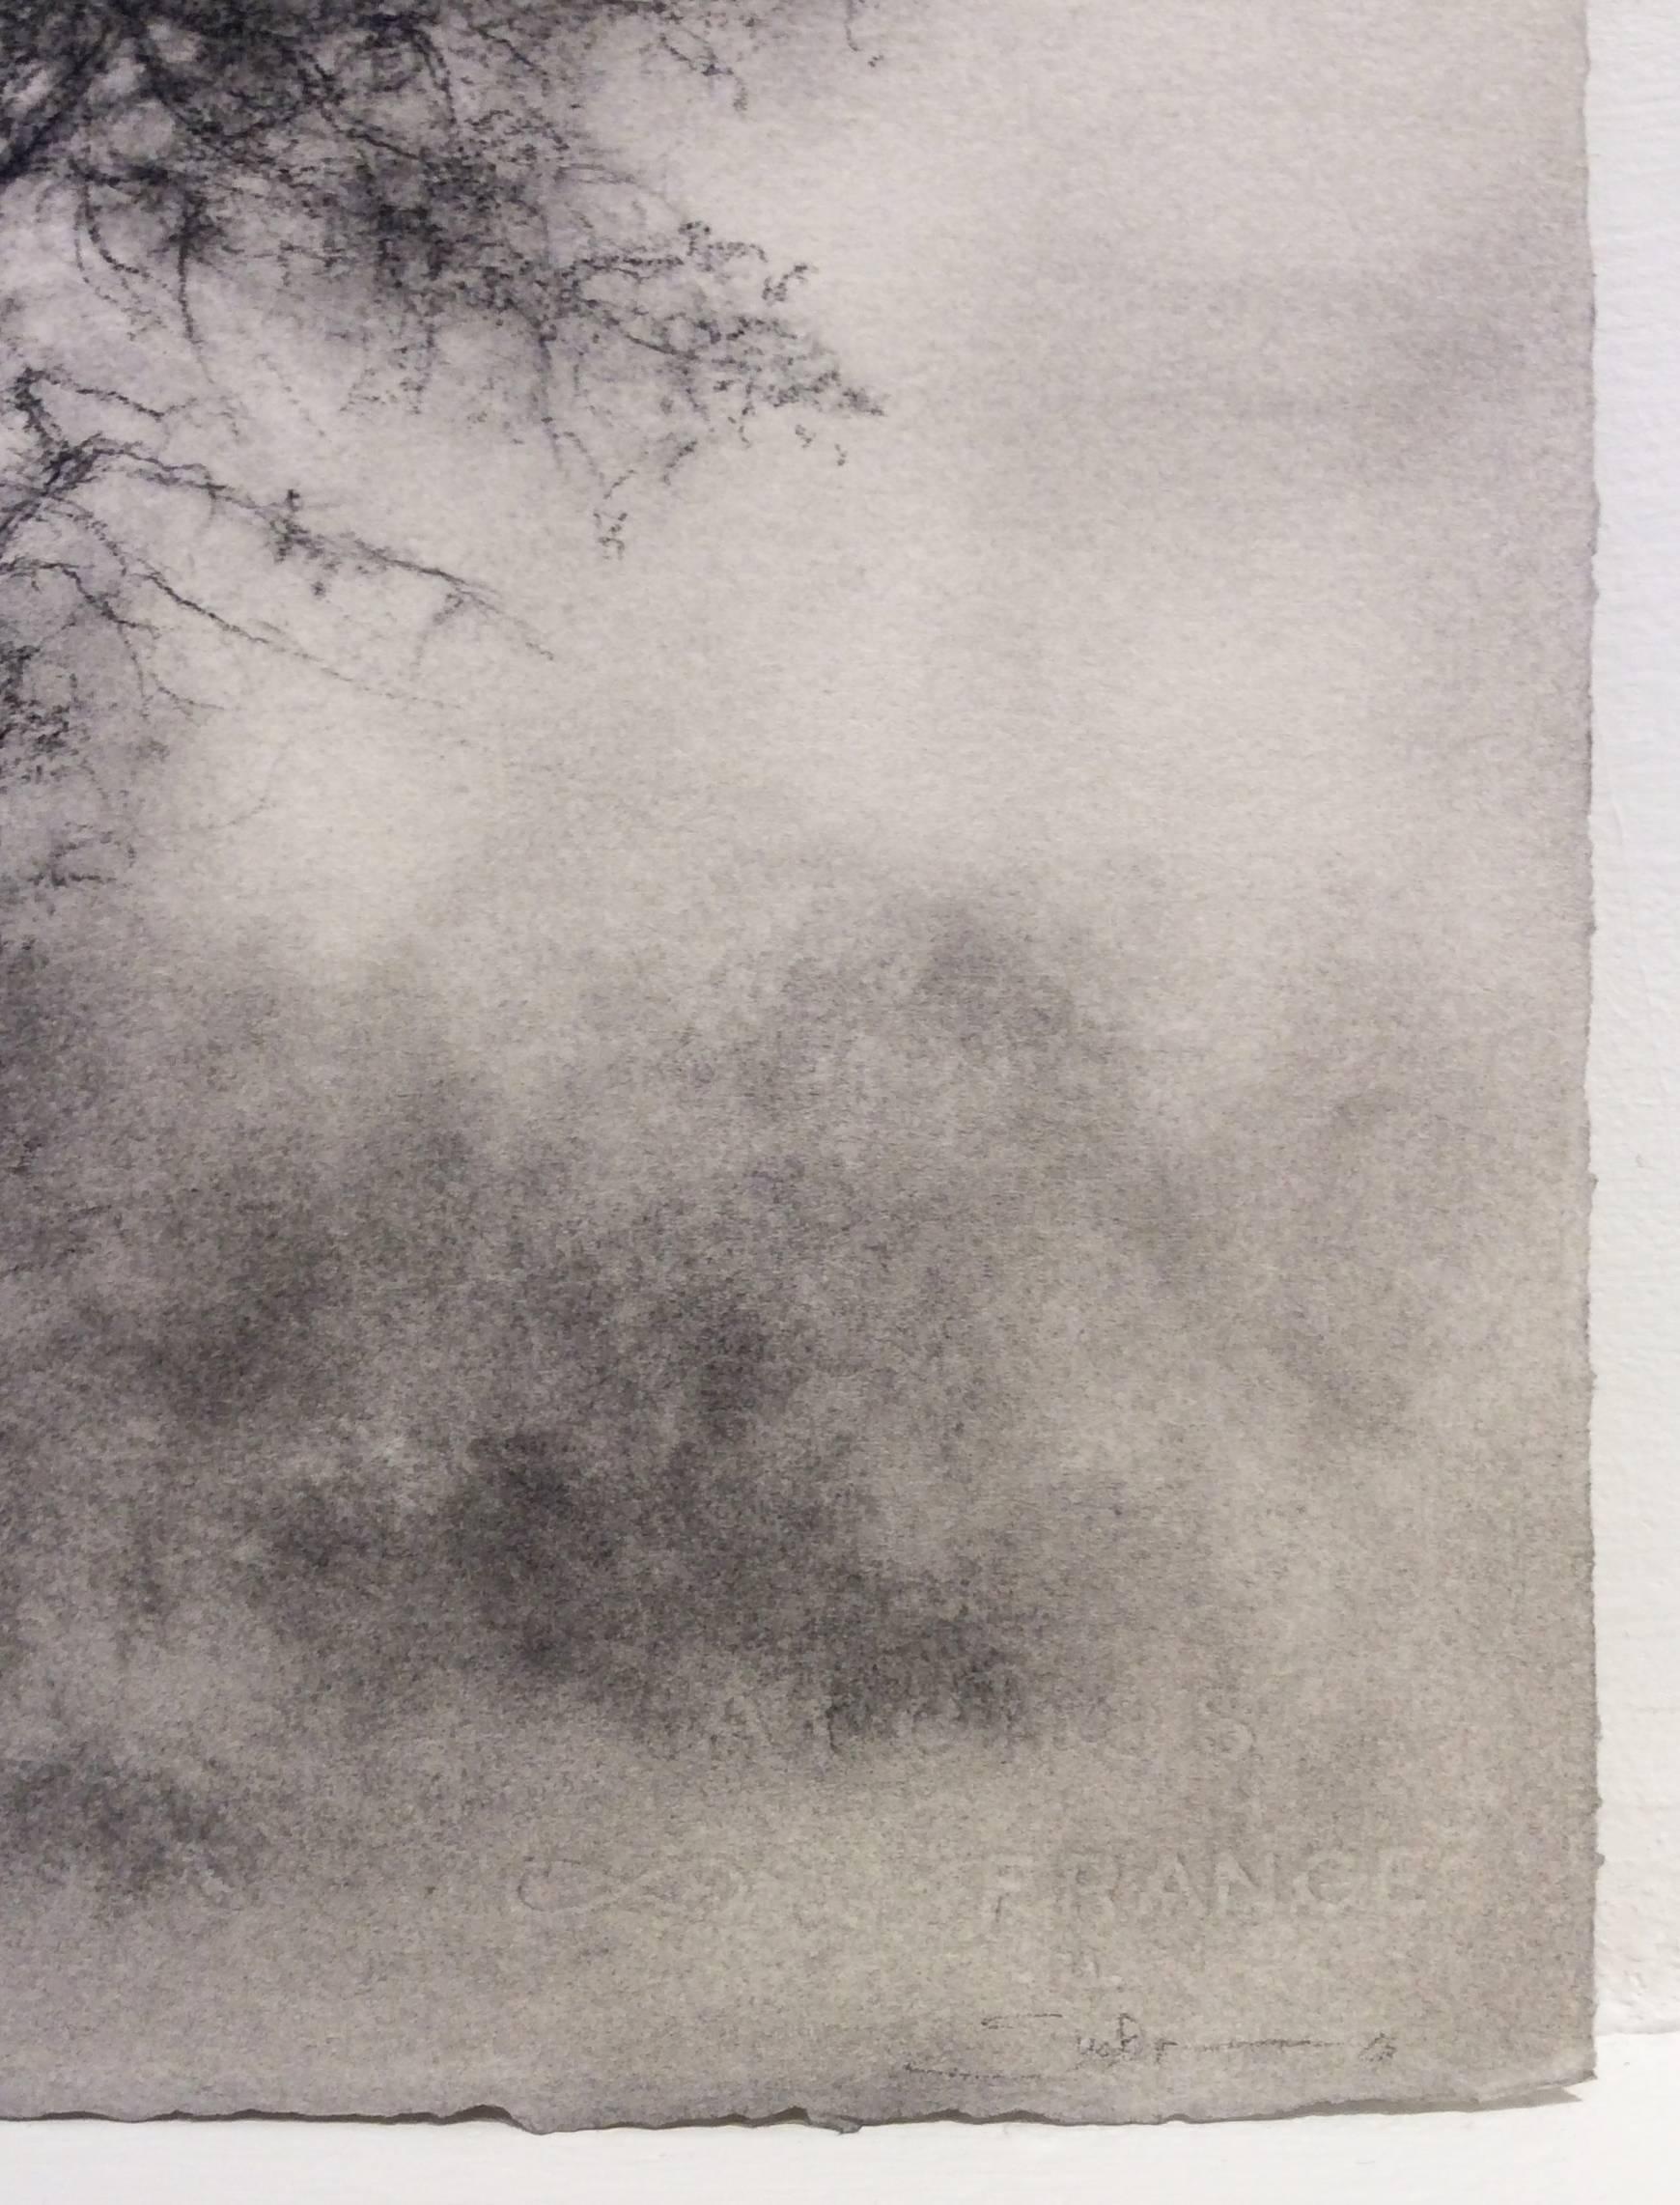 Greenhorn (Black & White Whimsical Tree Landscape Charcoal Drawing on Paper) - Contemporary Art by Sue Bryan